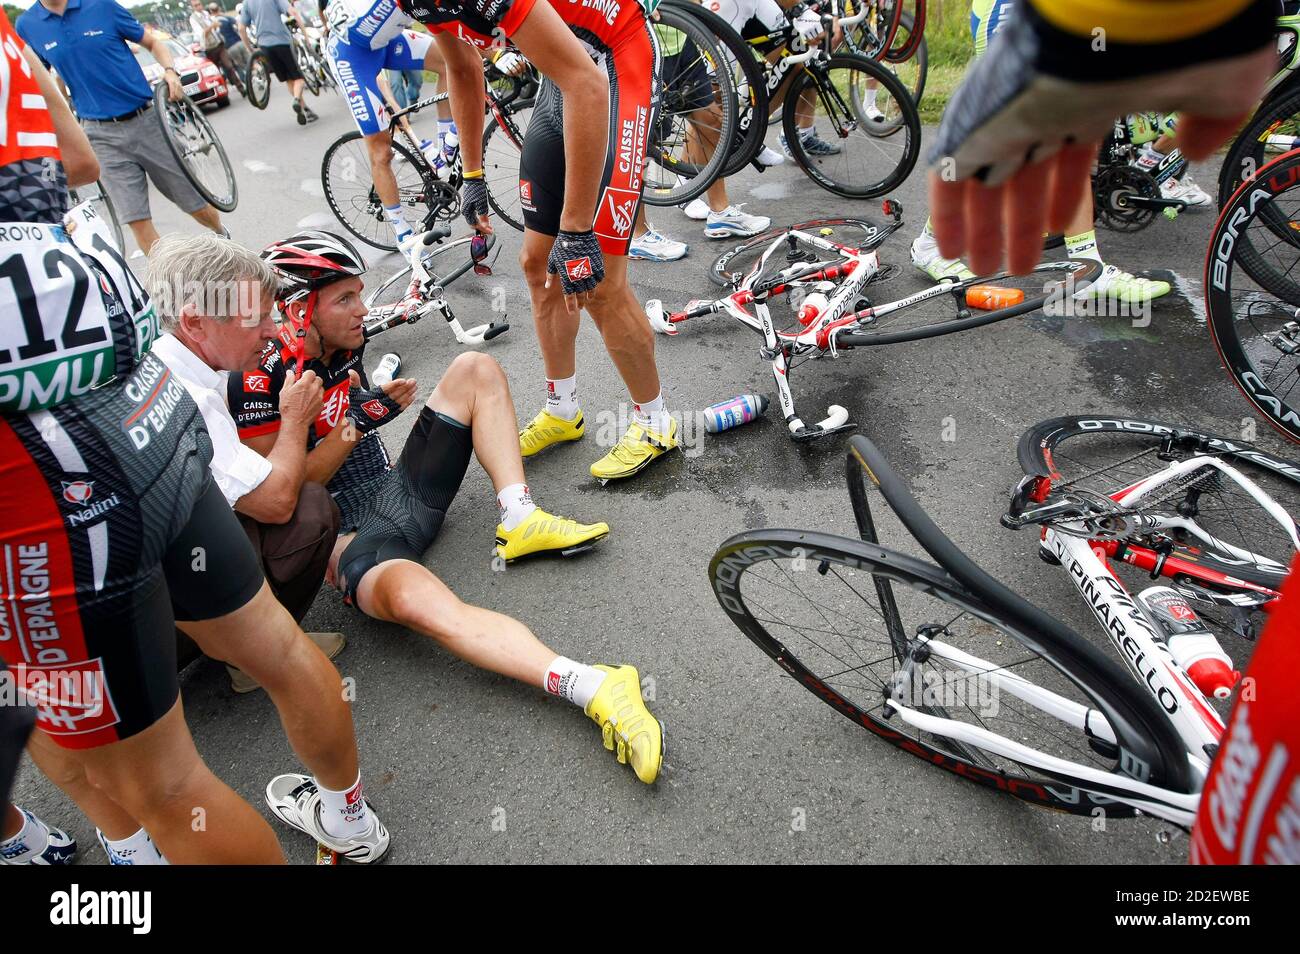 Tour de France doctor Gerard Porte (L) tends to Caisse d'Epargne rider Jose  Joaquin Rojas of Spain after a crash in the pack during the eleventh stage  of the 96th Tour de